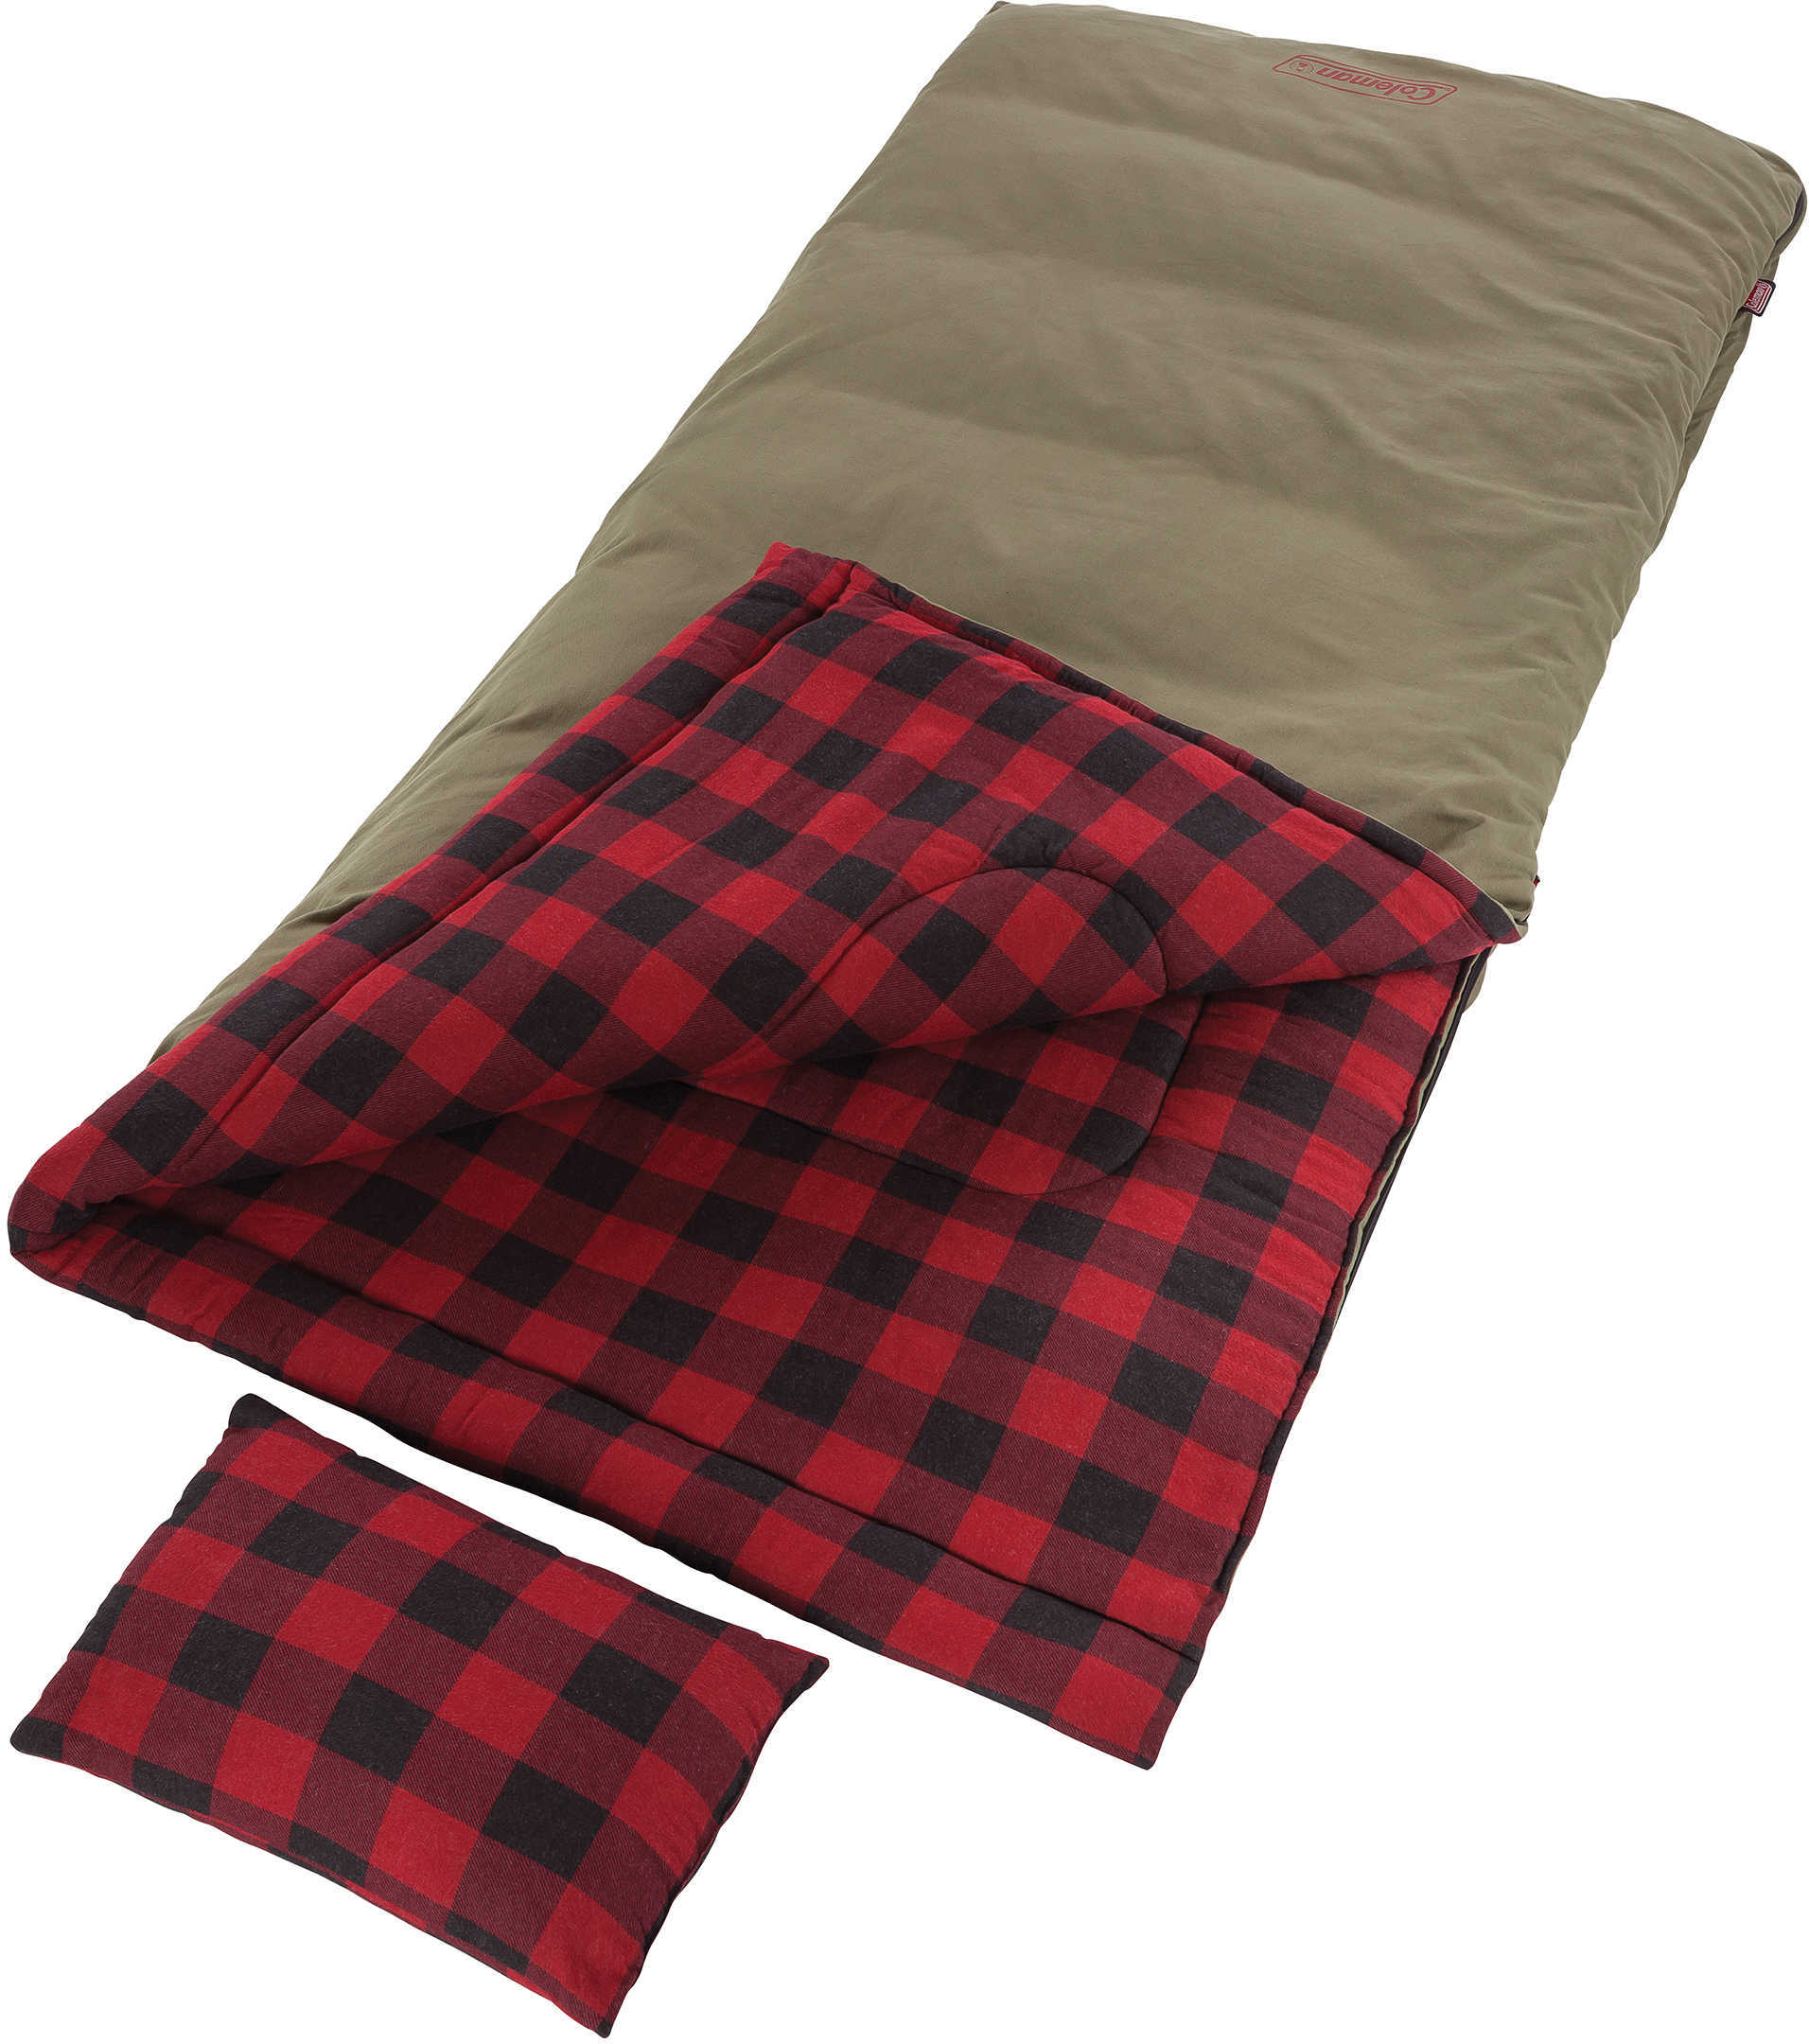 Coleman Big Game and Tall Sleeping Bag Plaid Red Md: 2000030093